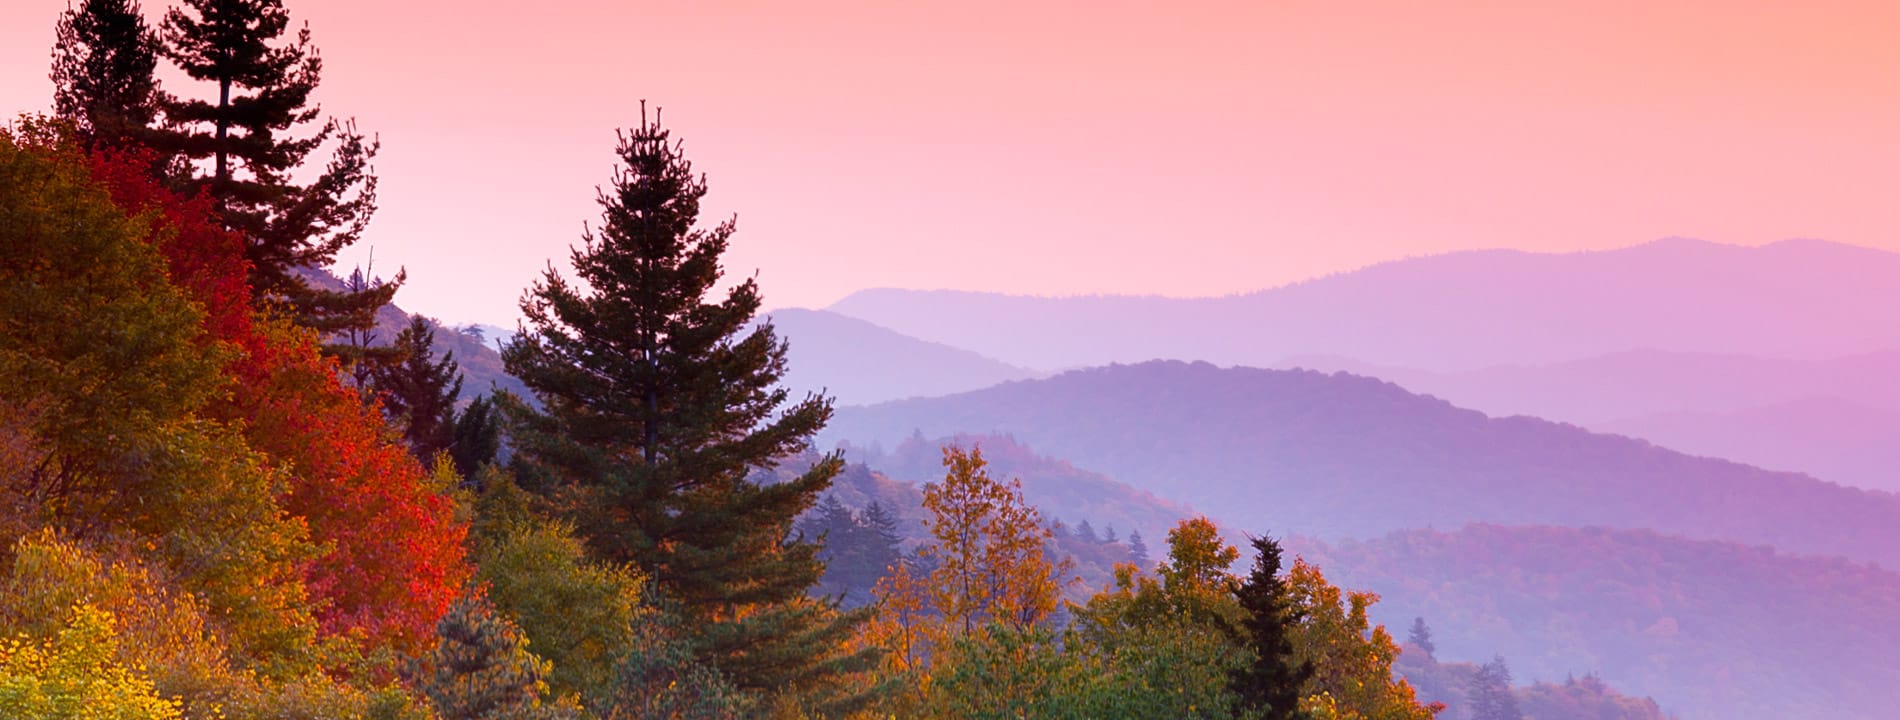 An autumn sunrise with a variety of trees in the foreground and misty mountains in the background.